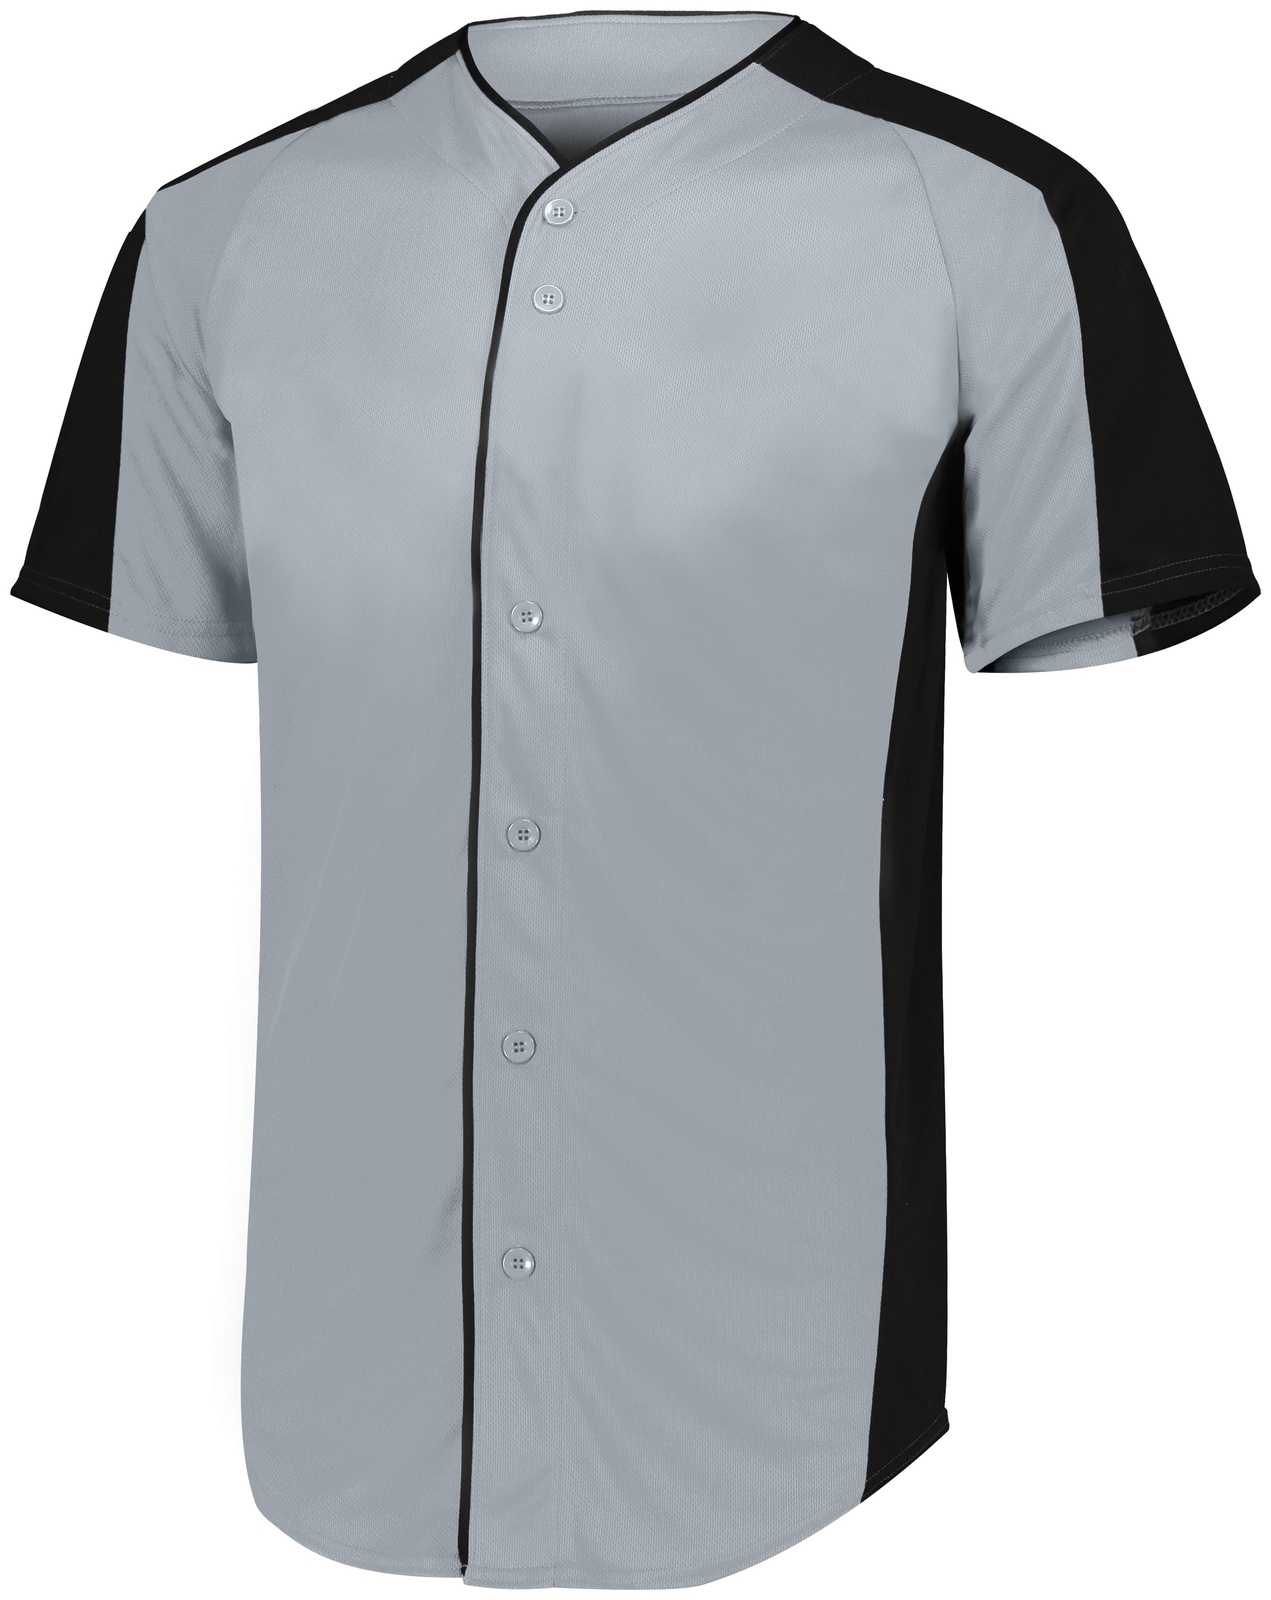 Augusta 1656 Youth Full-Button Baseball Jersey - Blue Grey Black - HIT a Double